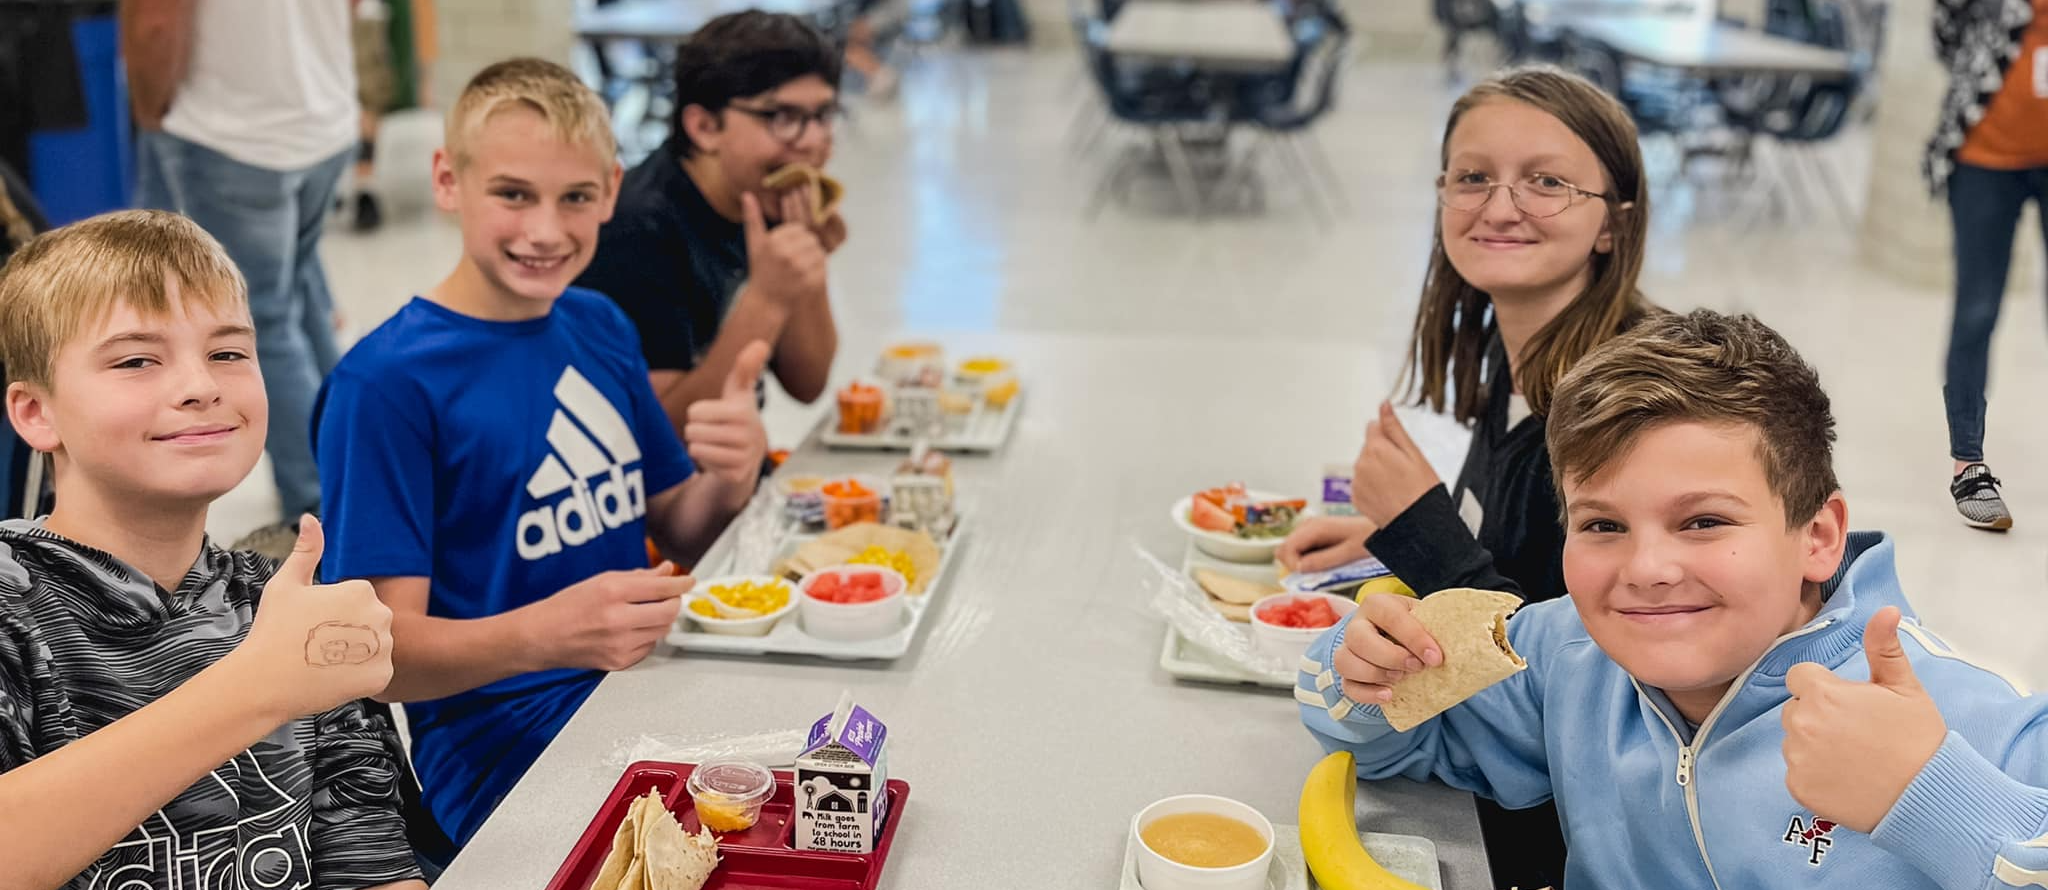 students at lunch giving camera a thumbs up